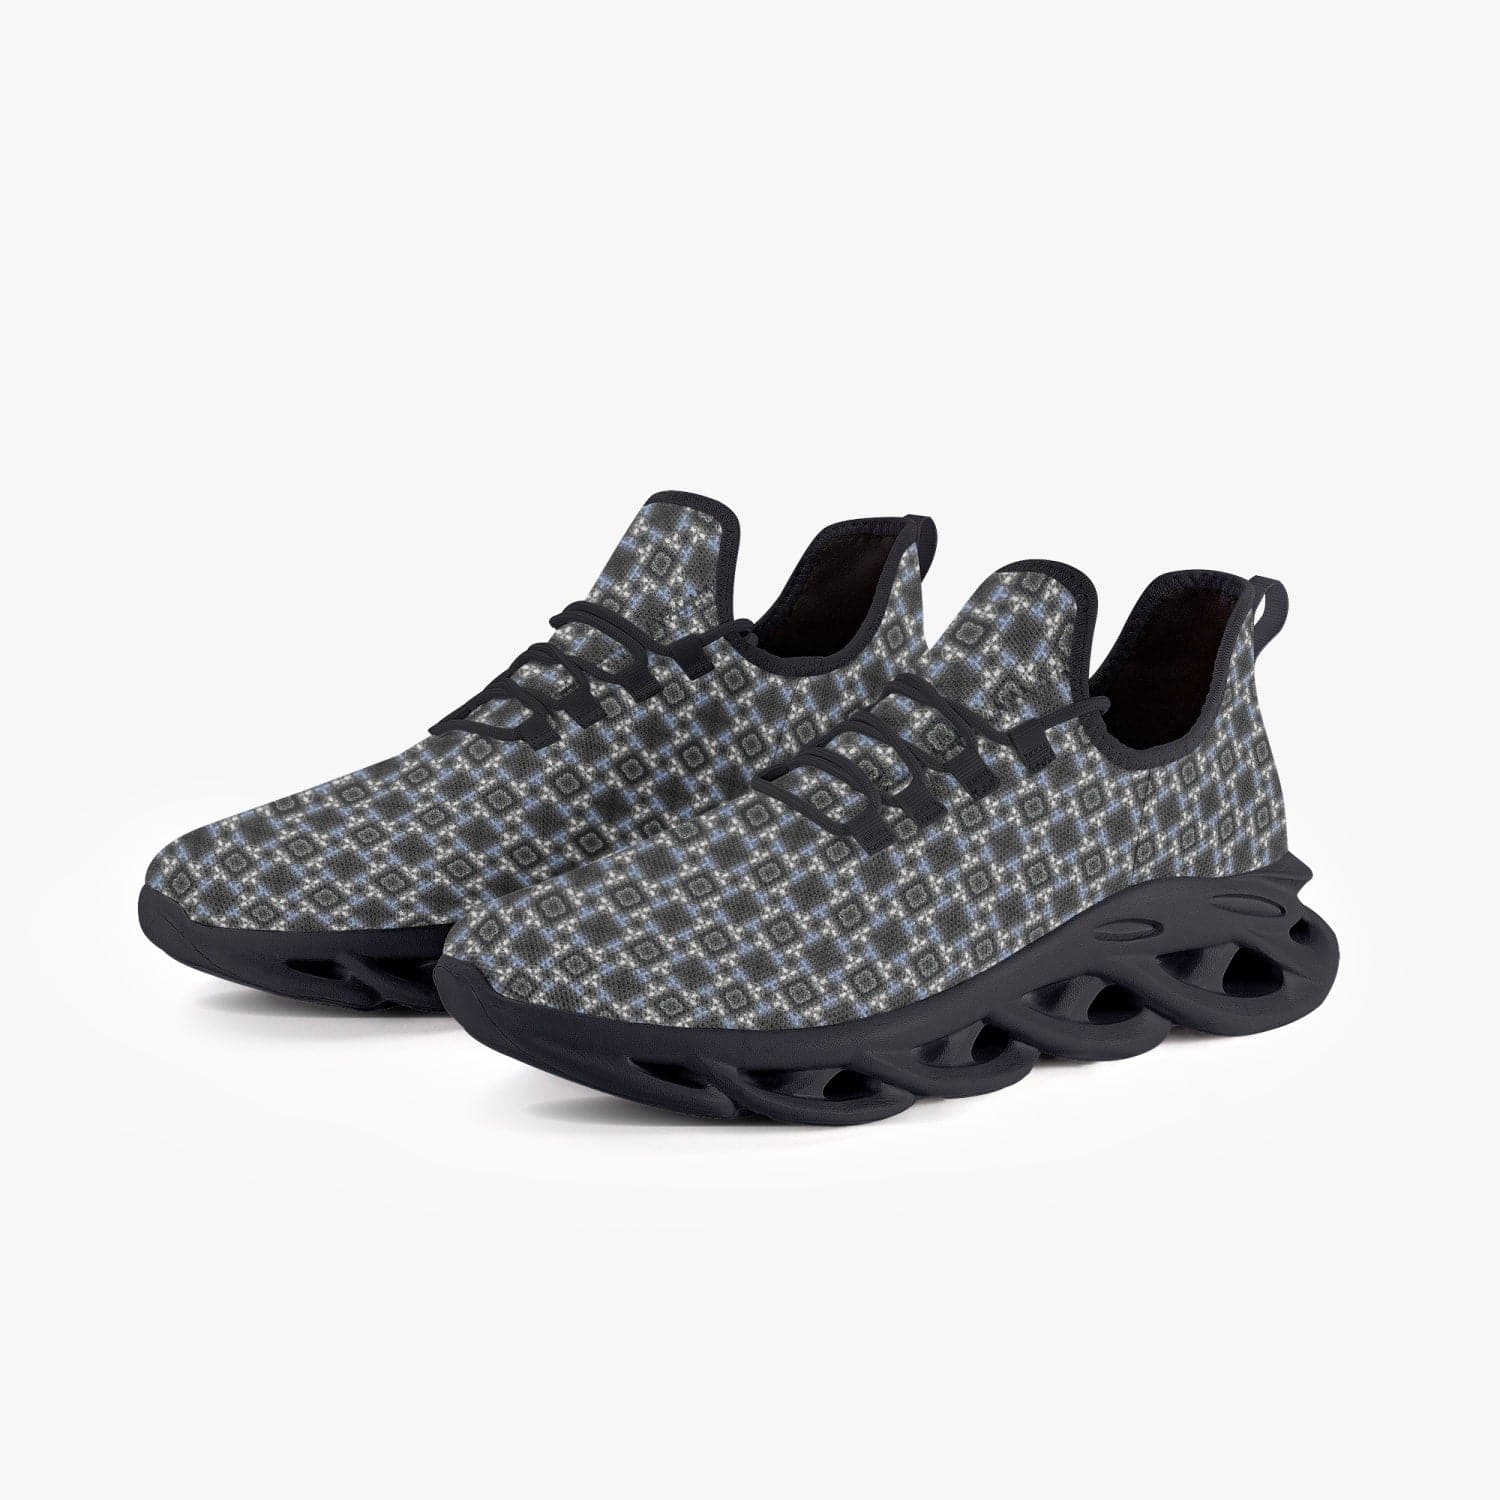 Mountain field with snow,  Bounce Mesh Knit  Trendy Sneakers for women and men- Black, designed by Sensus Studio Design